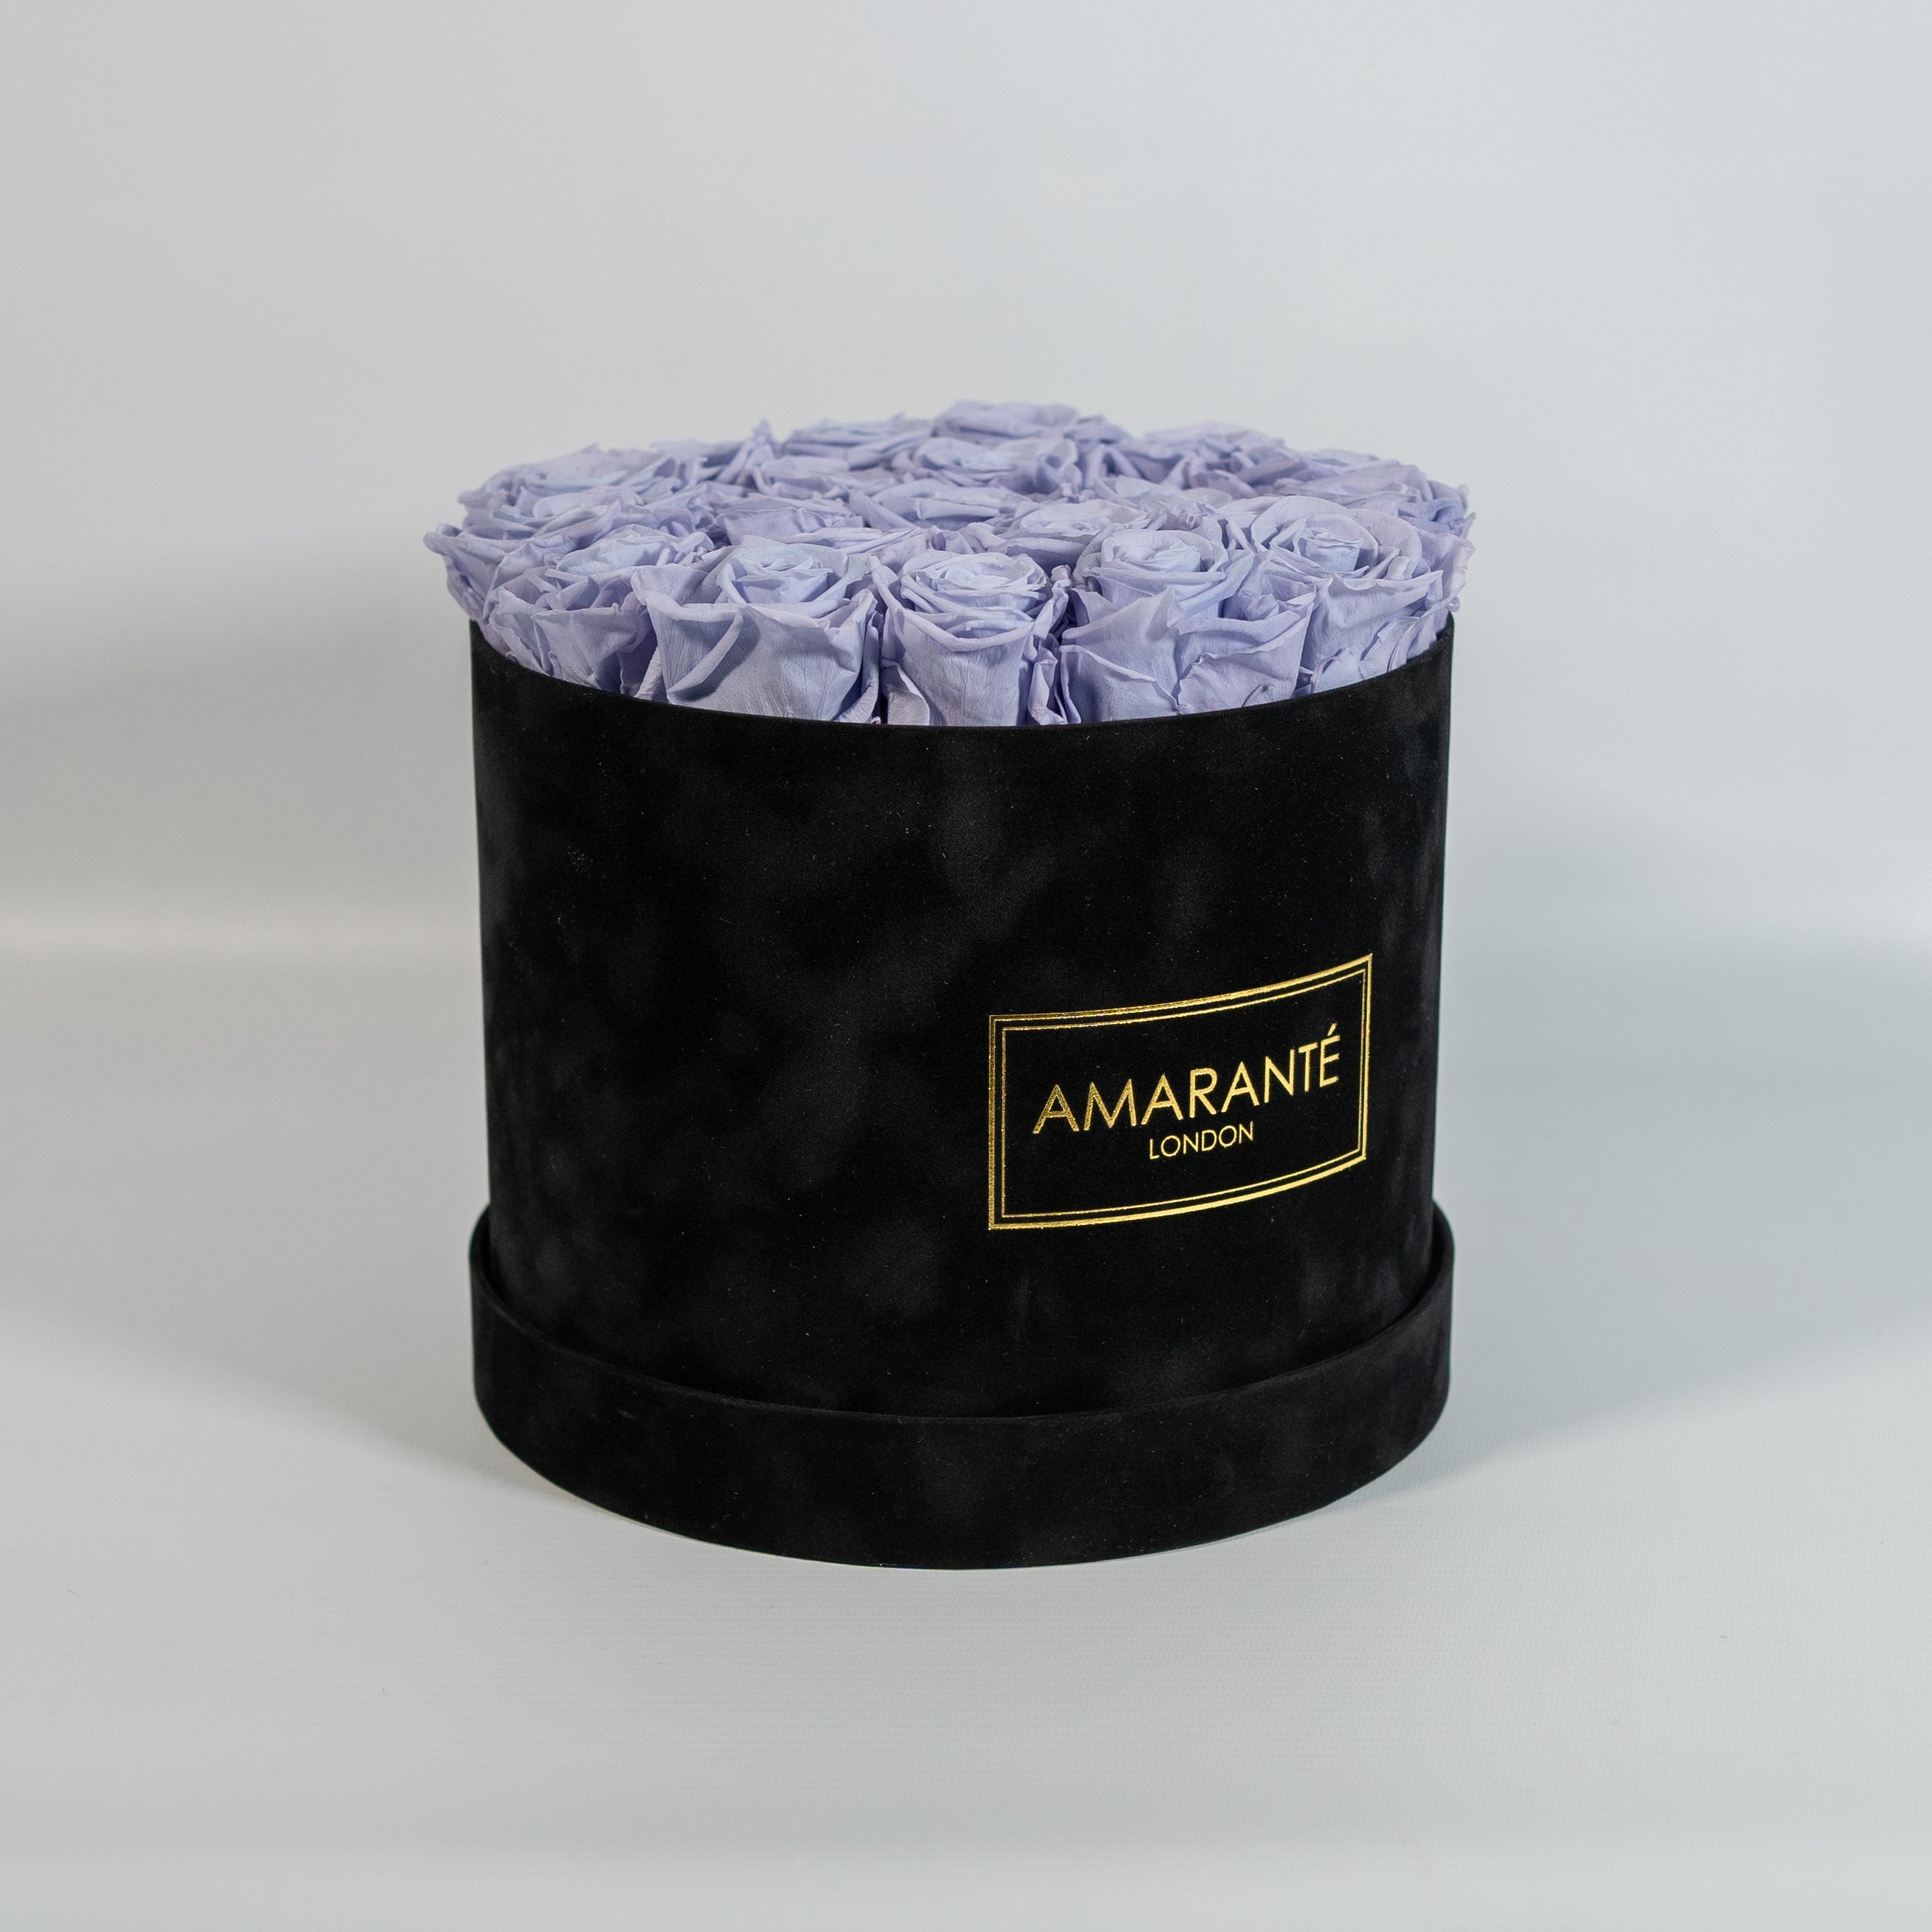 Spring-time inspired lavender Roses in a sophisticated black box 